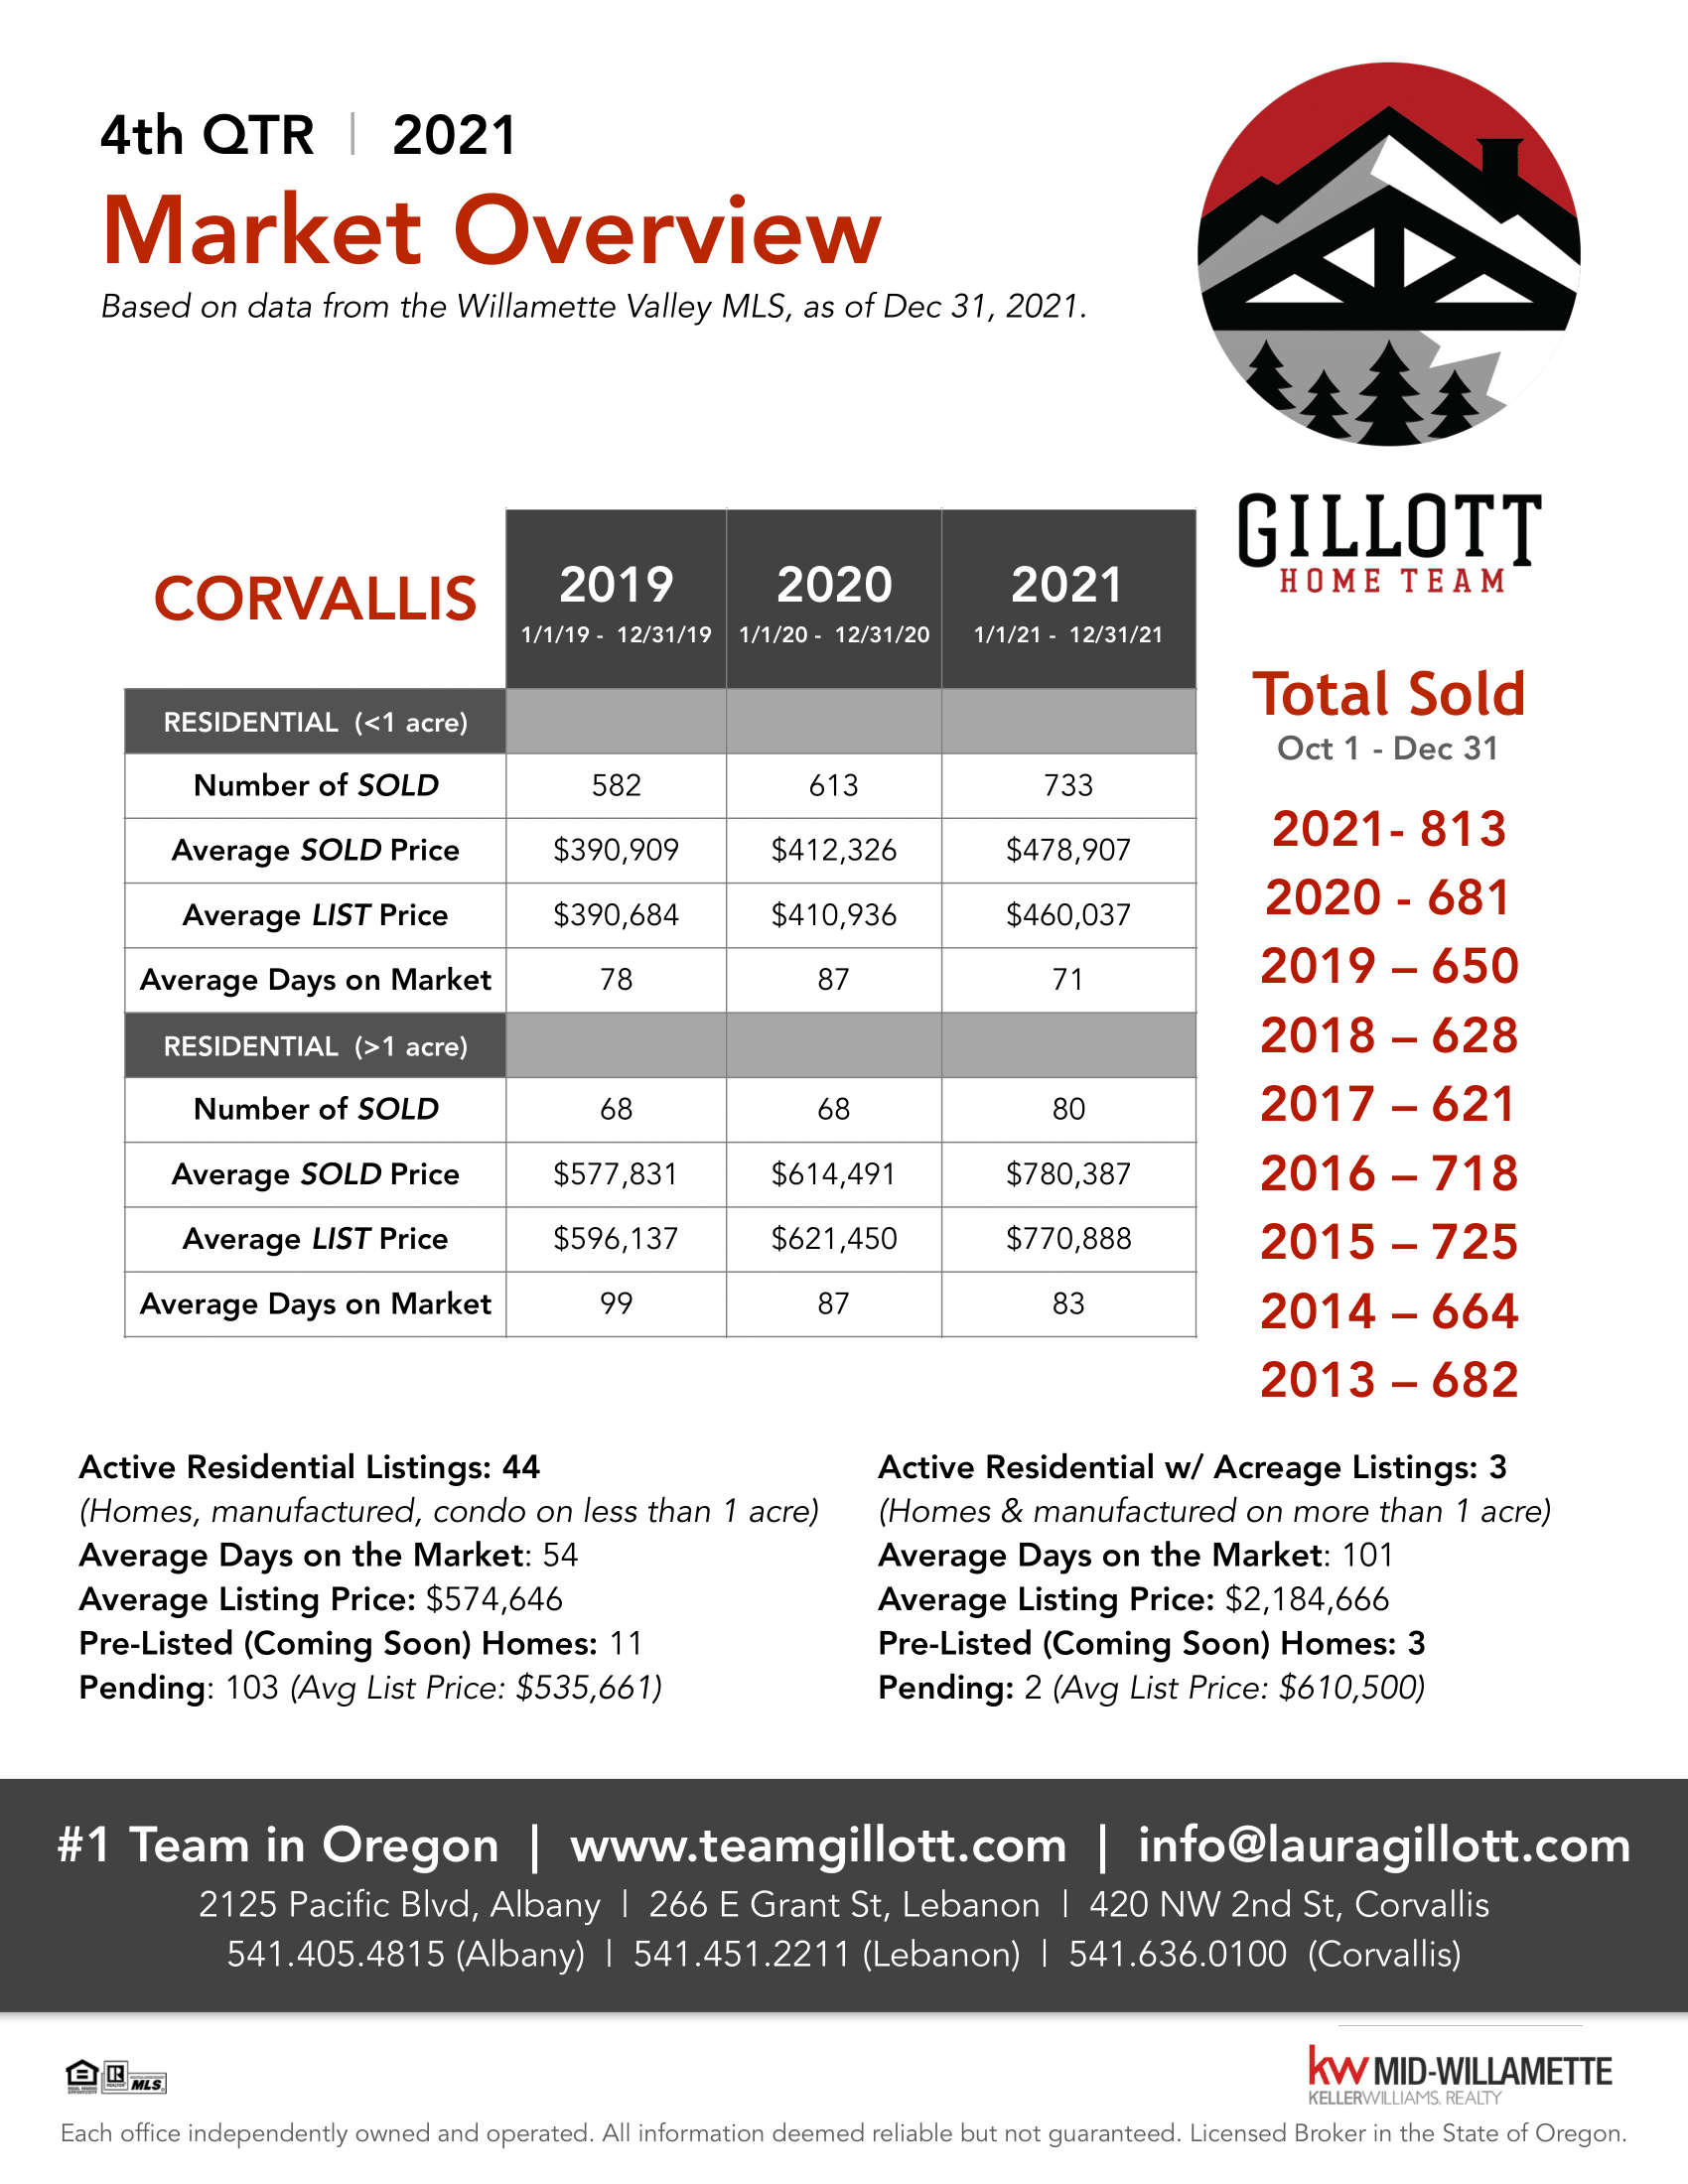 4th Qtr Corvallis 2021 PDF Updated-1.png